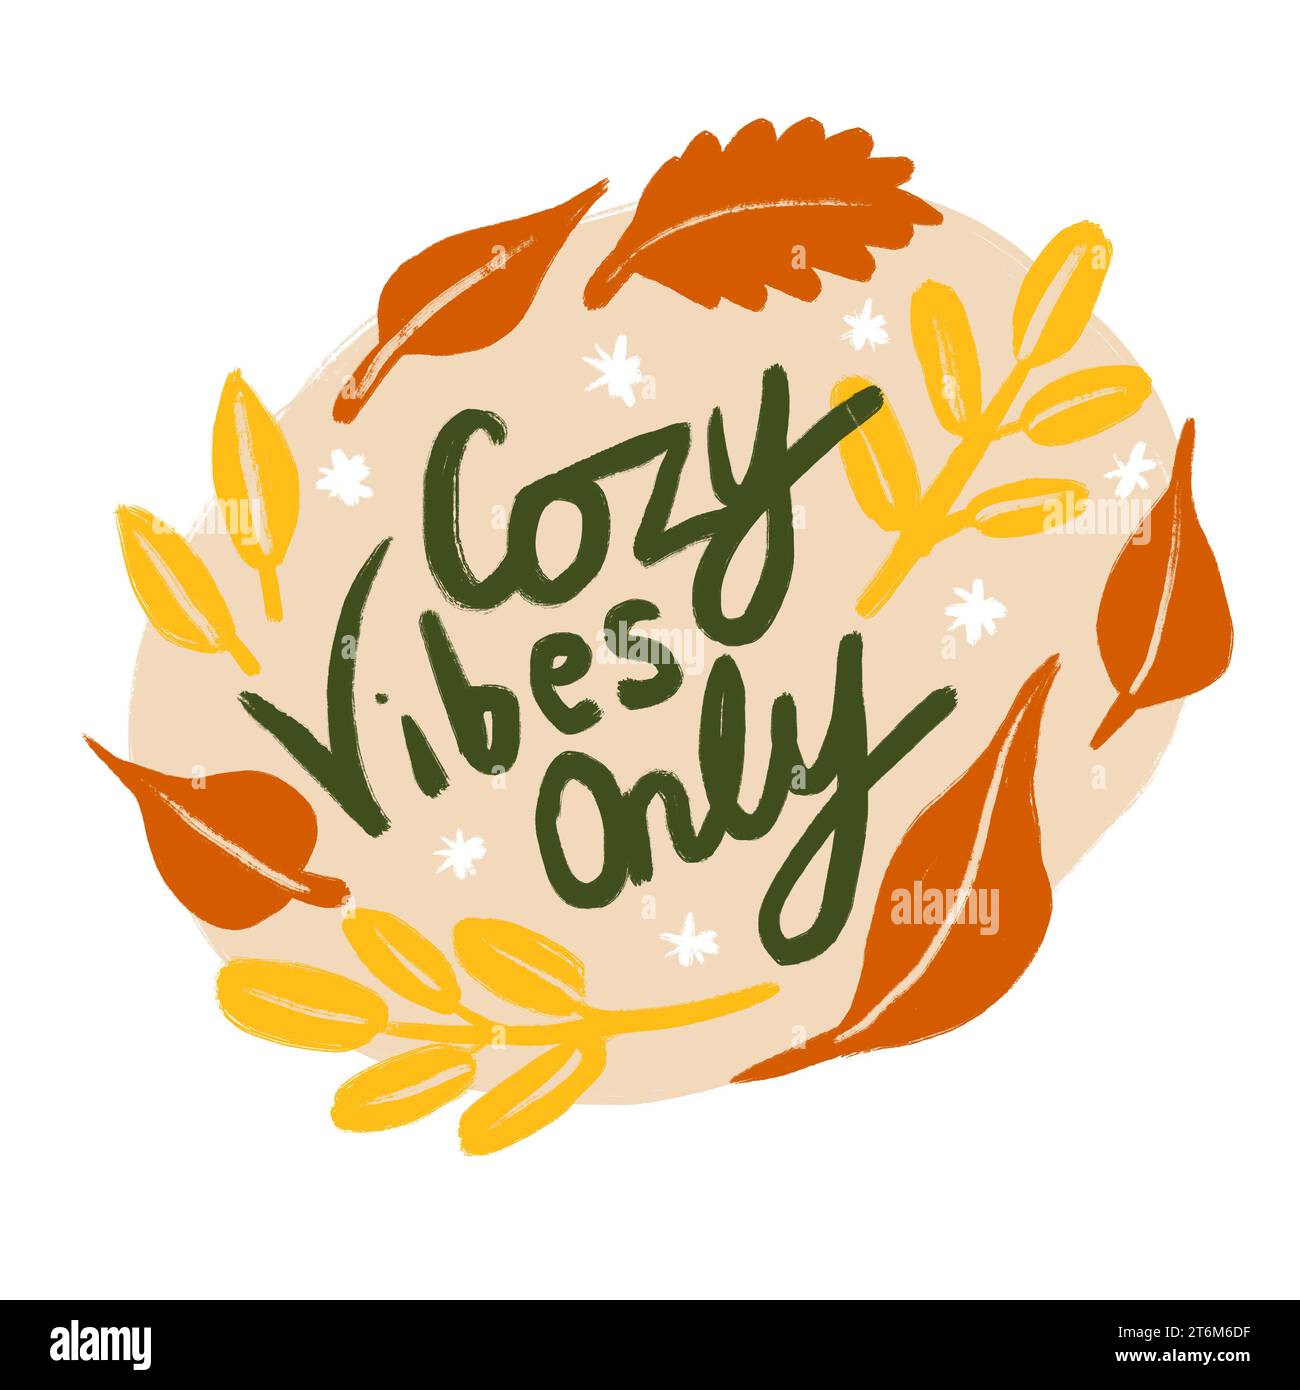 Hand drawn illustration of fall autumn frame Cozy vibes only words slogan. Yellow orange autumnal forest nature leaves in oval shape, thanksgiving season design sticker invitation poster, seasonal warm drawing Stock Photo